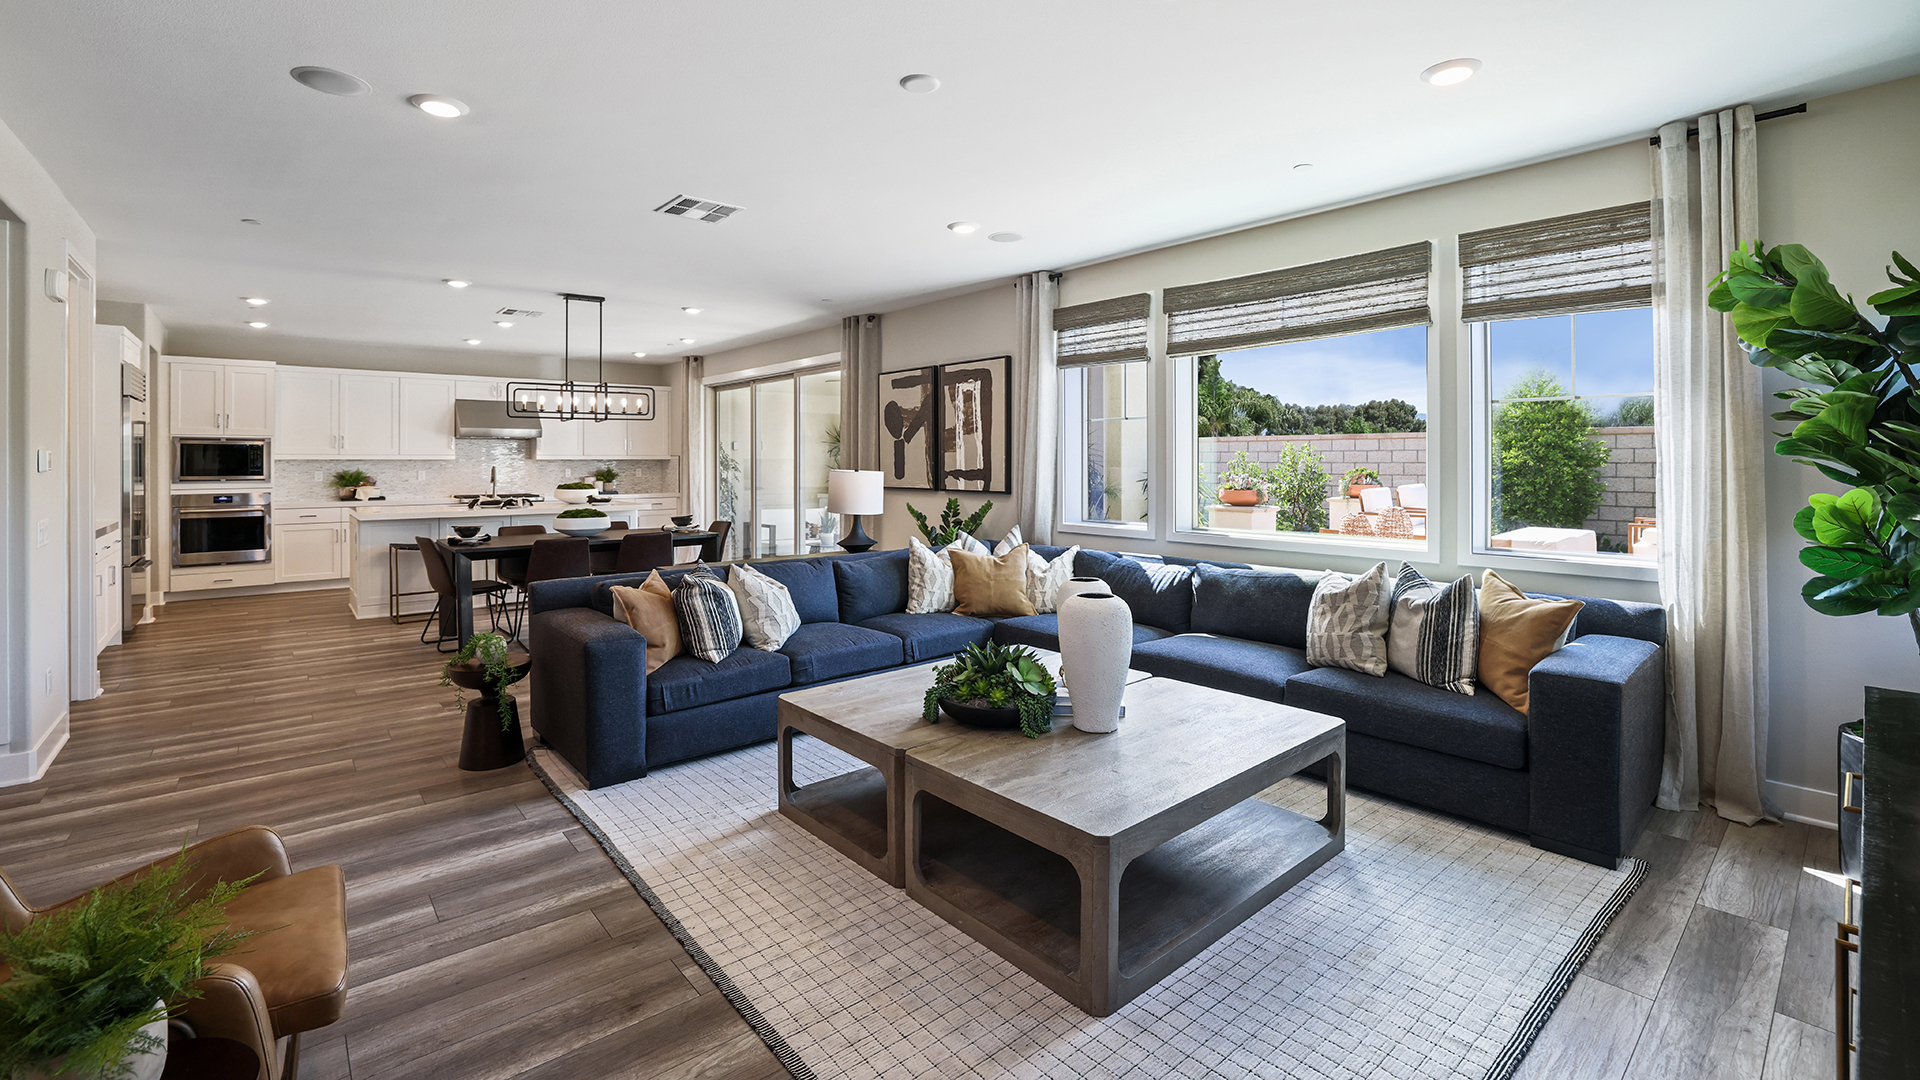 Lennar open concept living room with blue sectional sofa